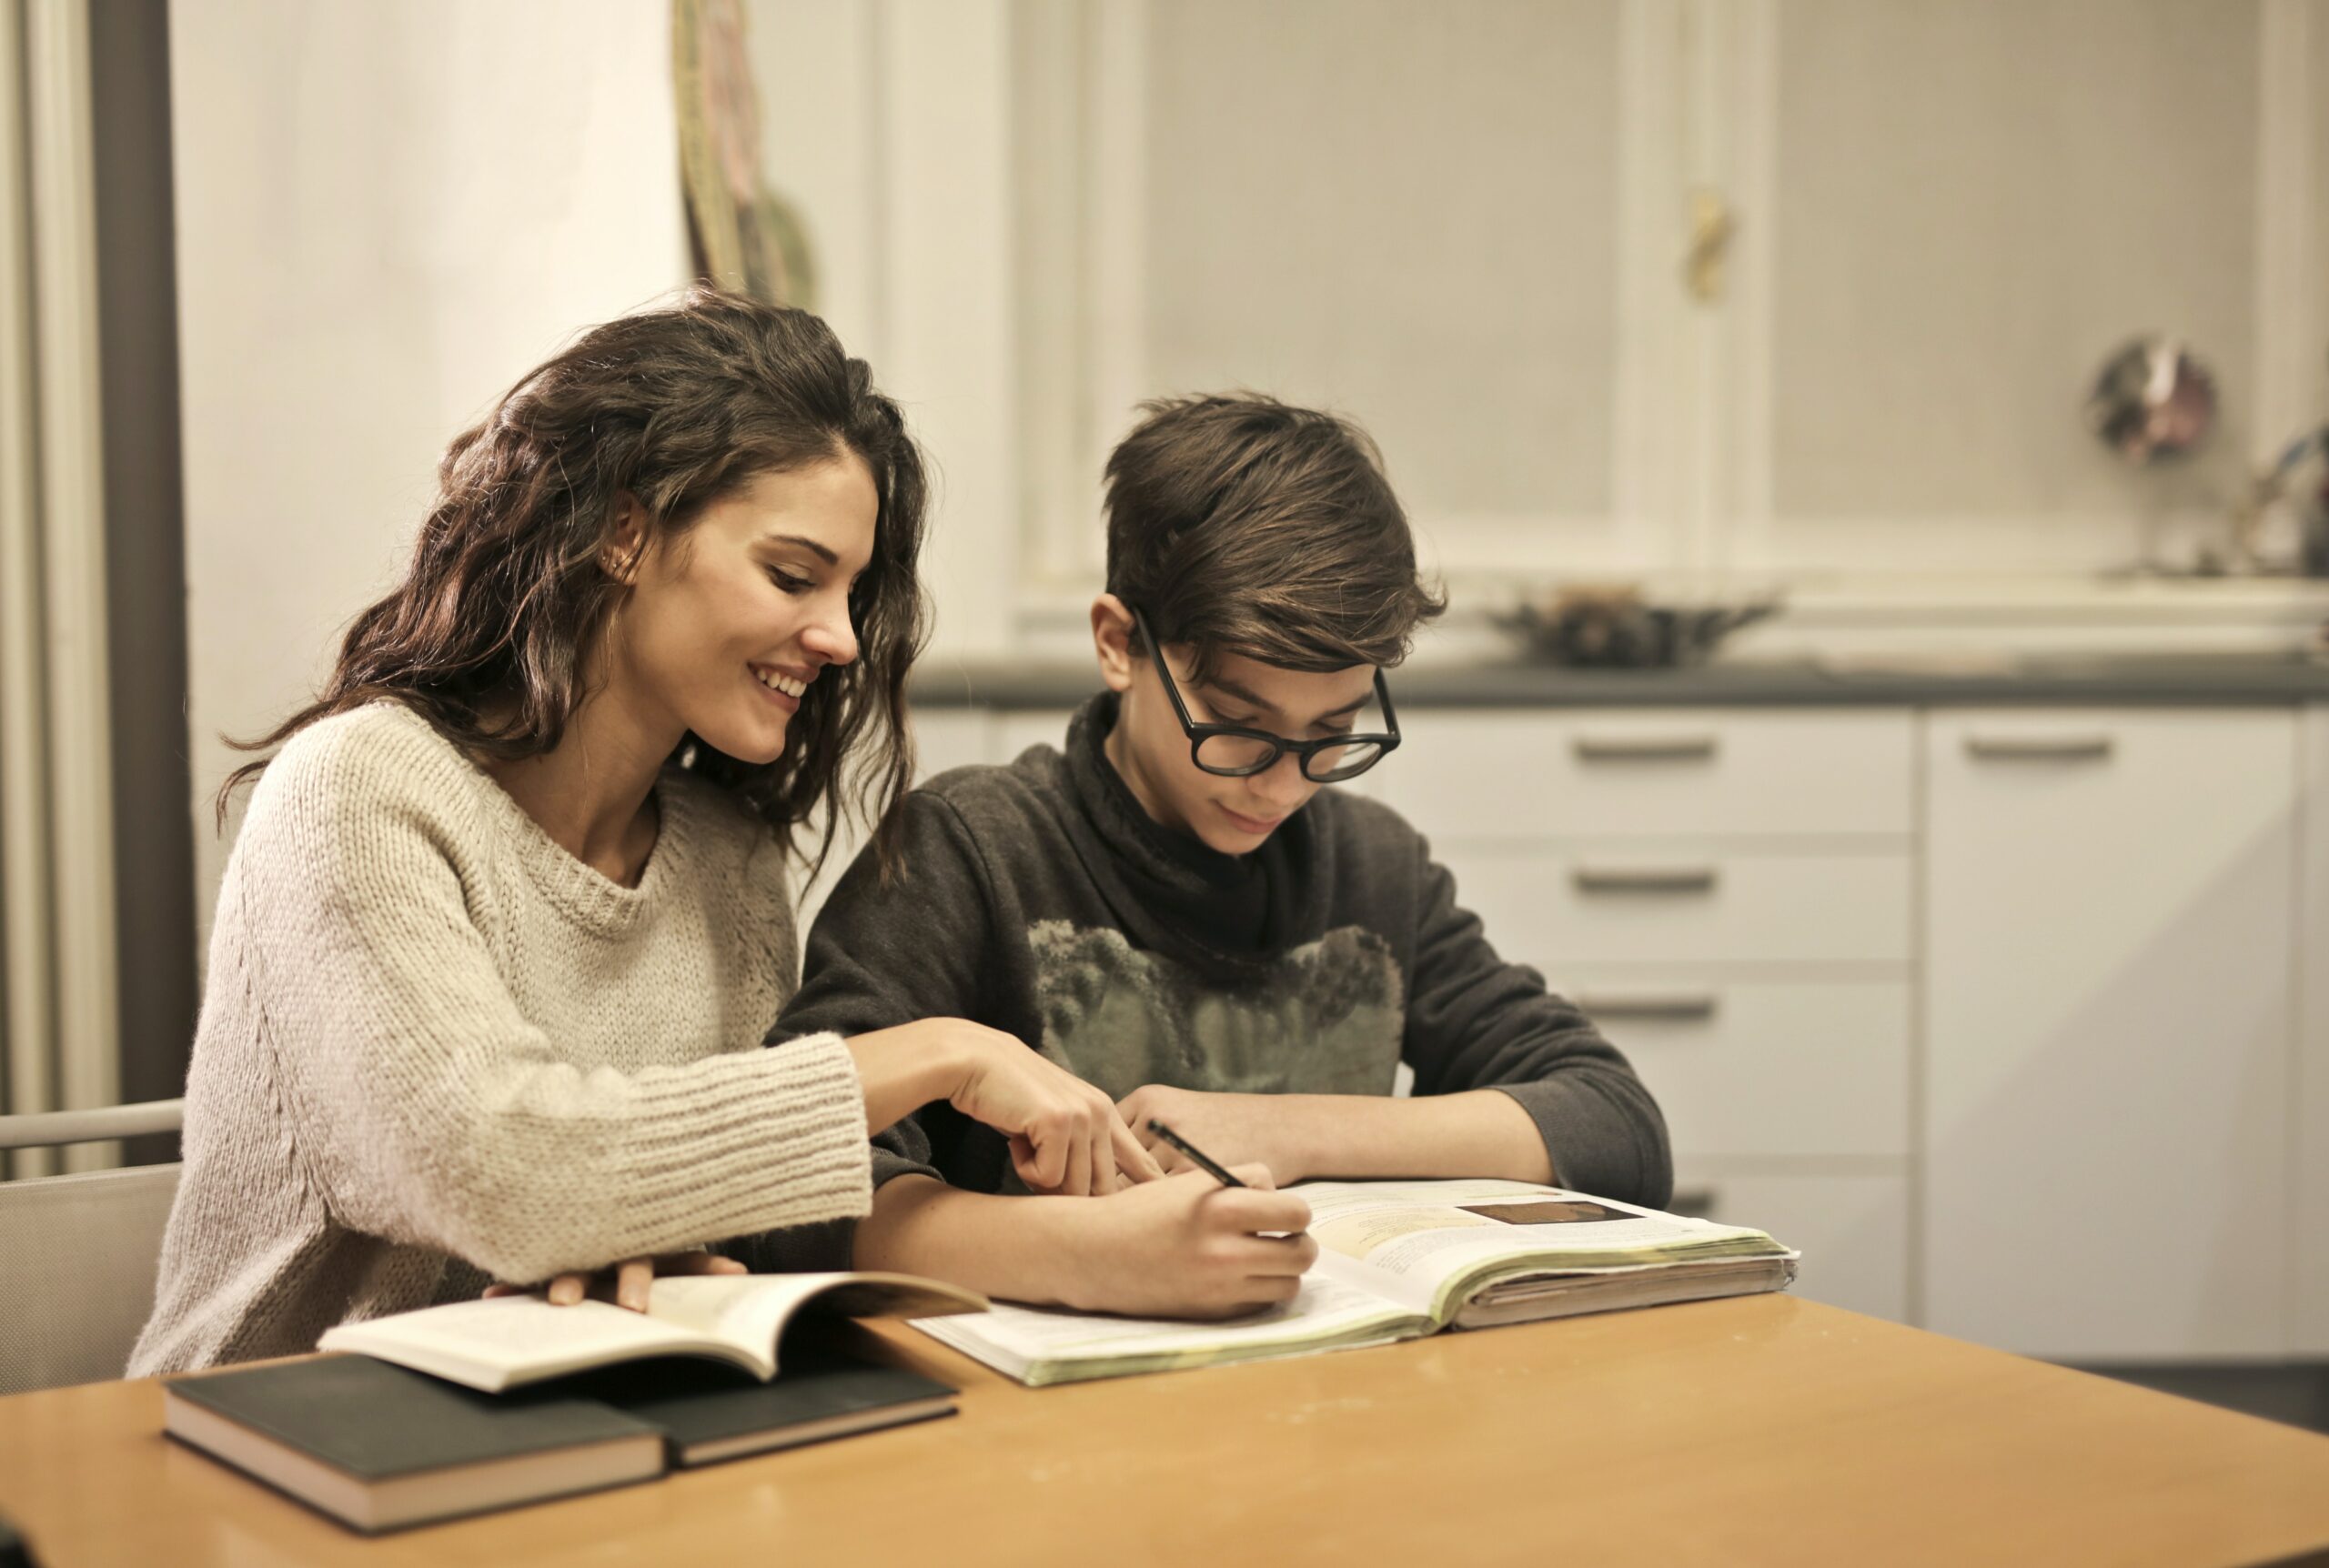 Female high school student helping younger student with homework